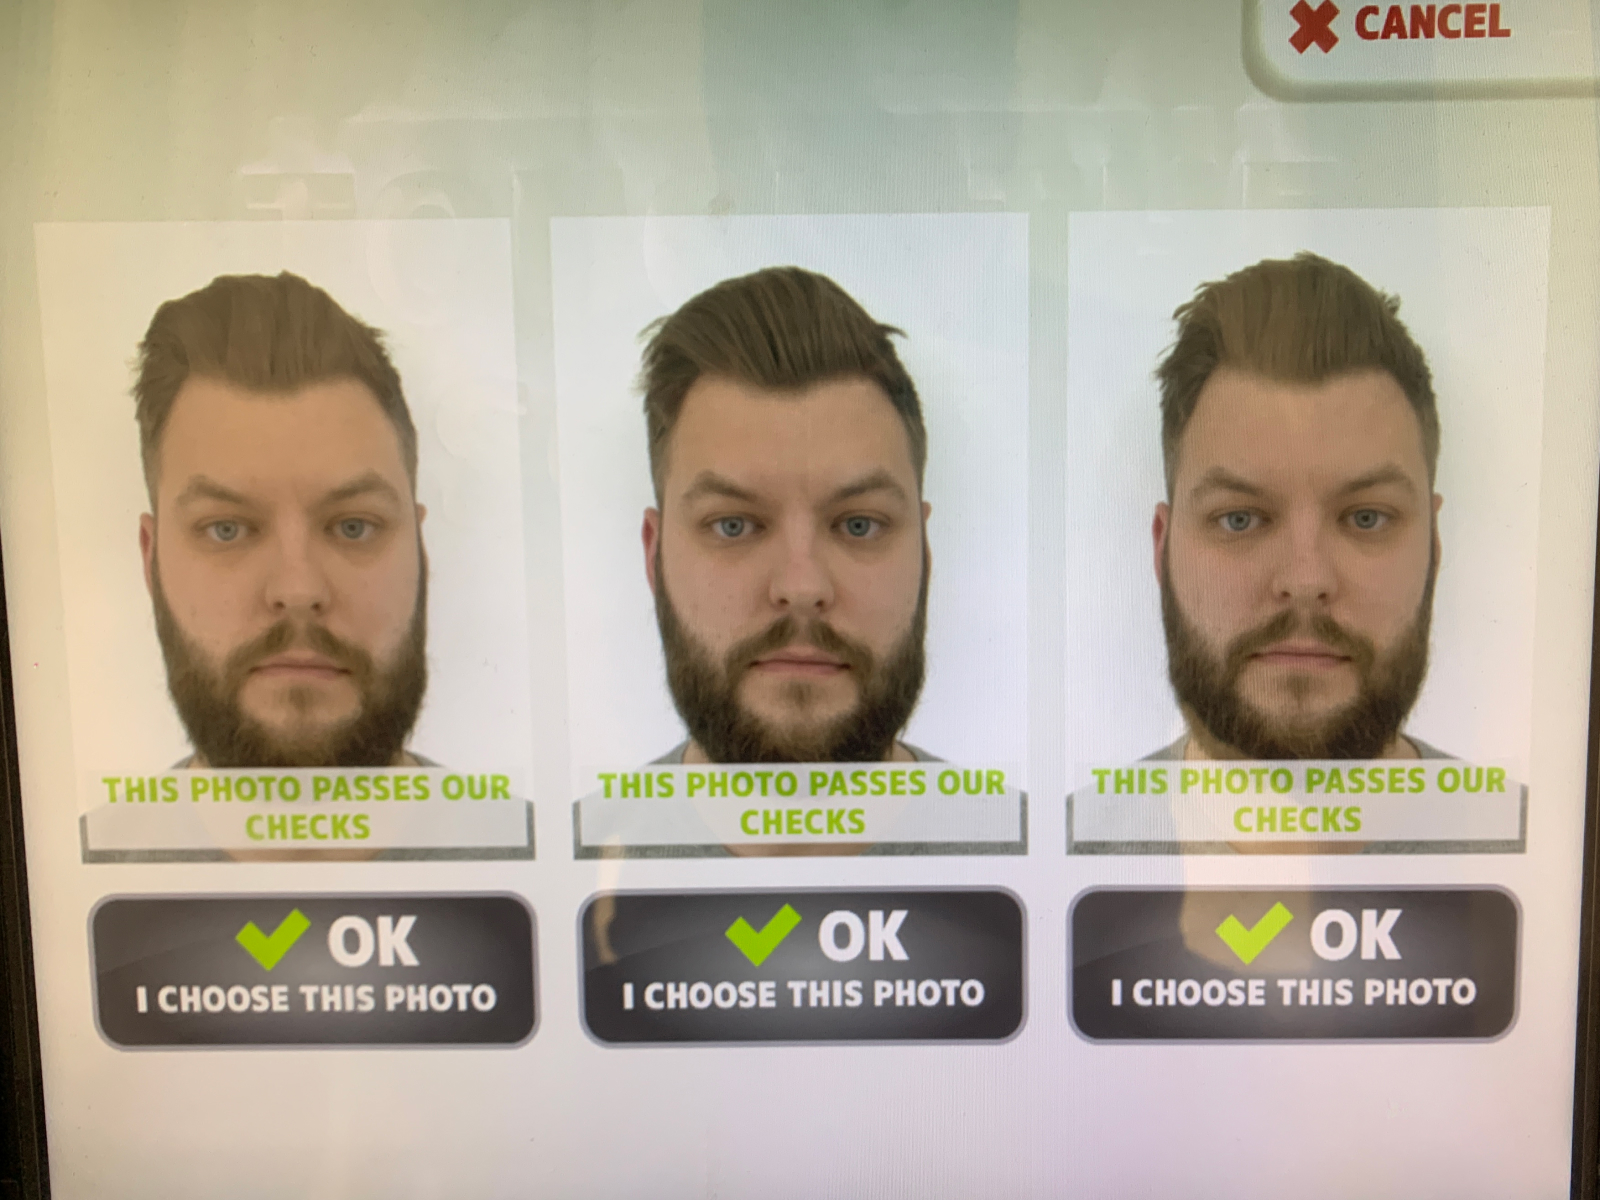 Three nearly identical passport photos on a screen in which I have a long beard and bags under my eyes. Each photo offers the option to “Choose this photo.”